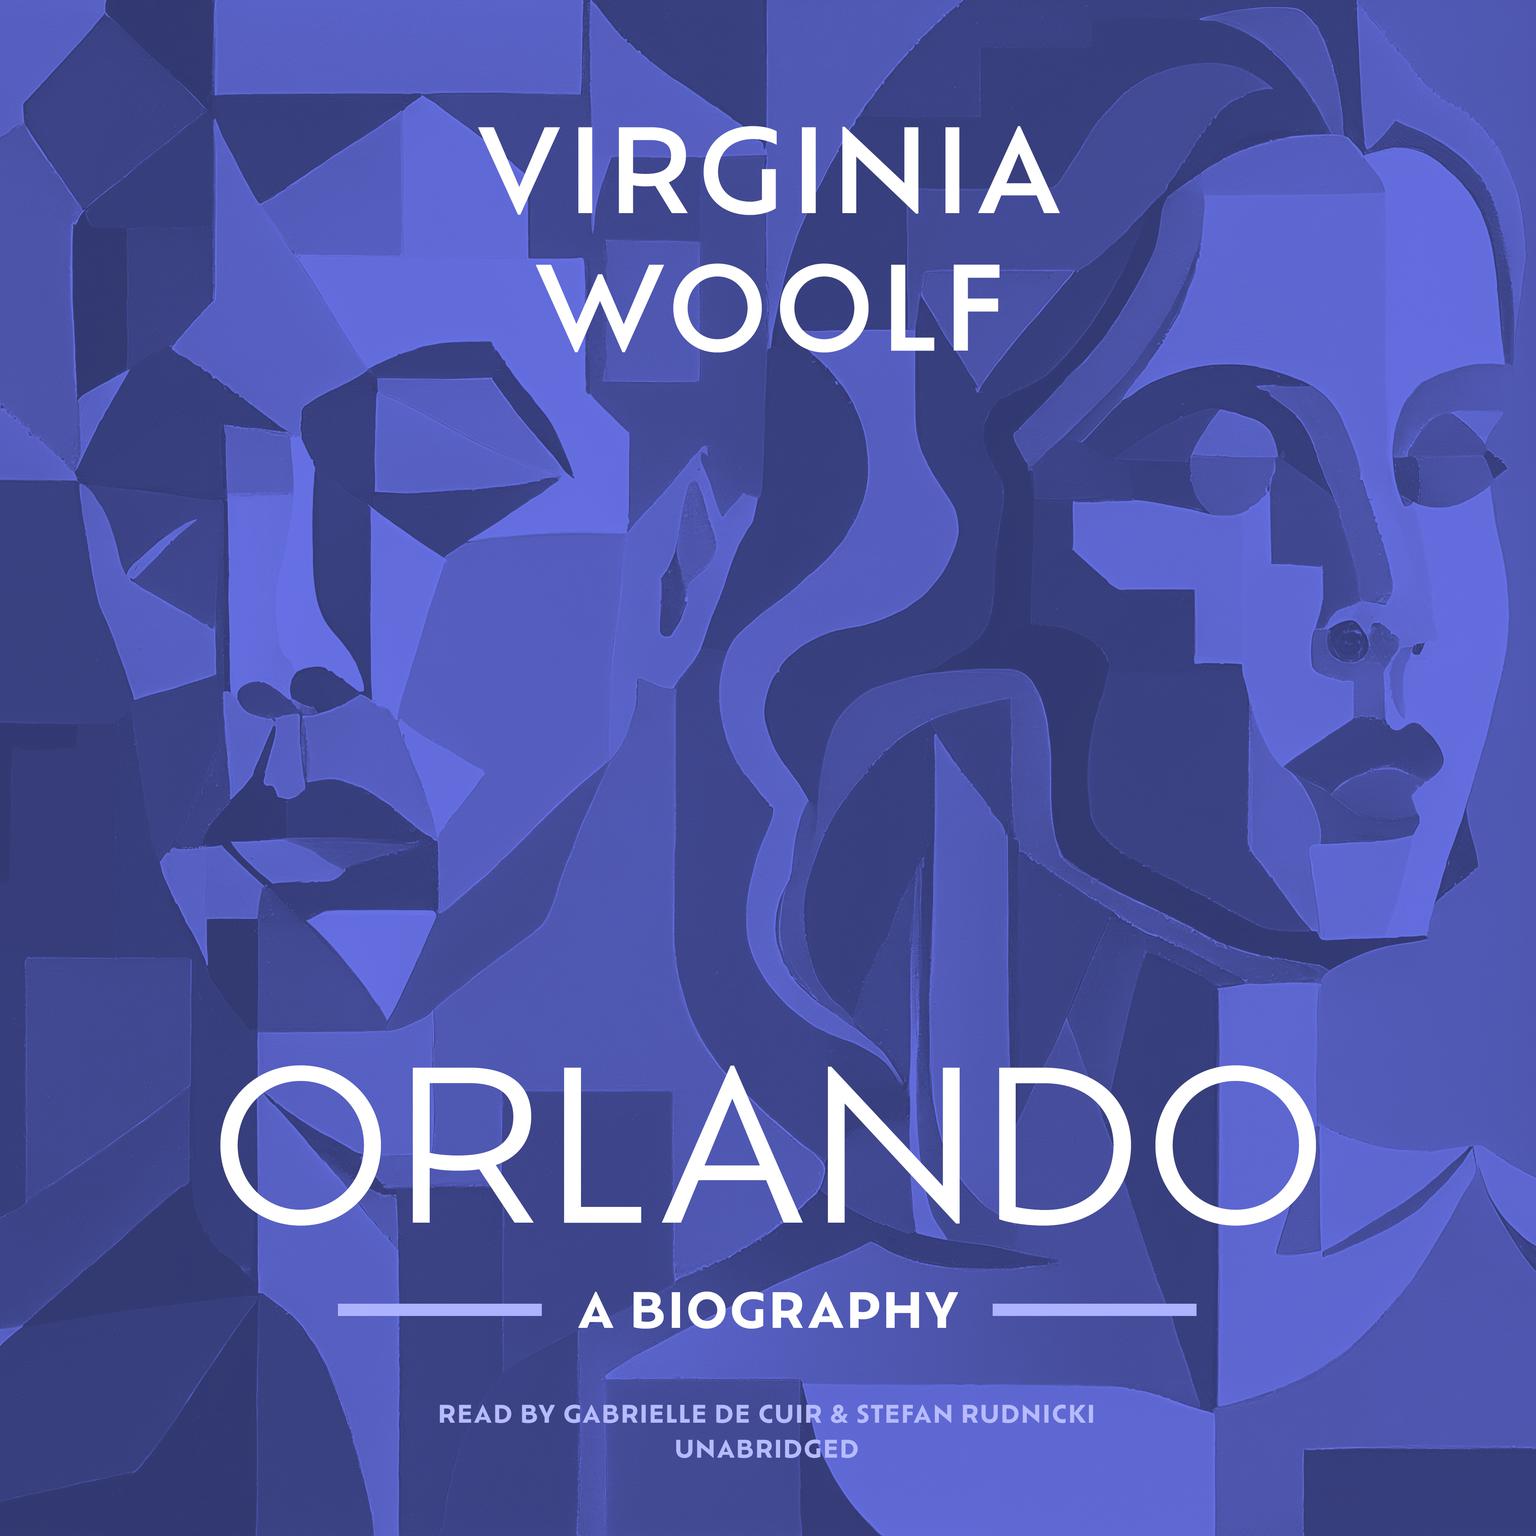 Orlando: A Biography Audiobook, by Virginia Woolf